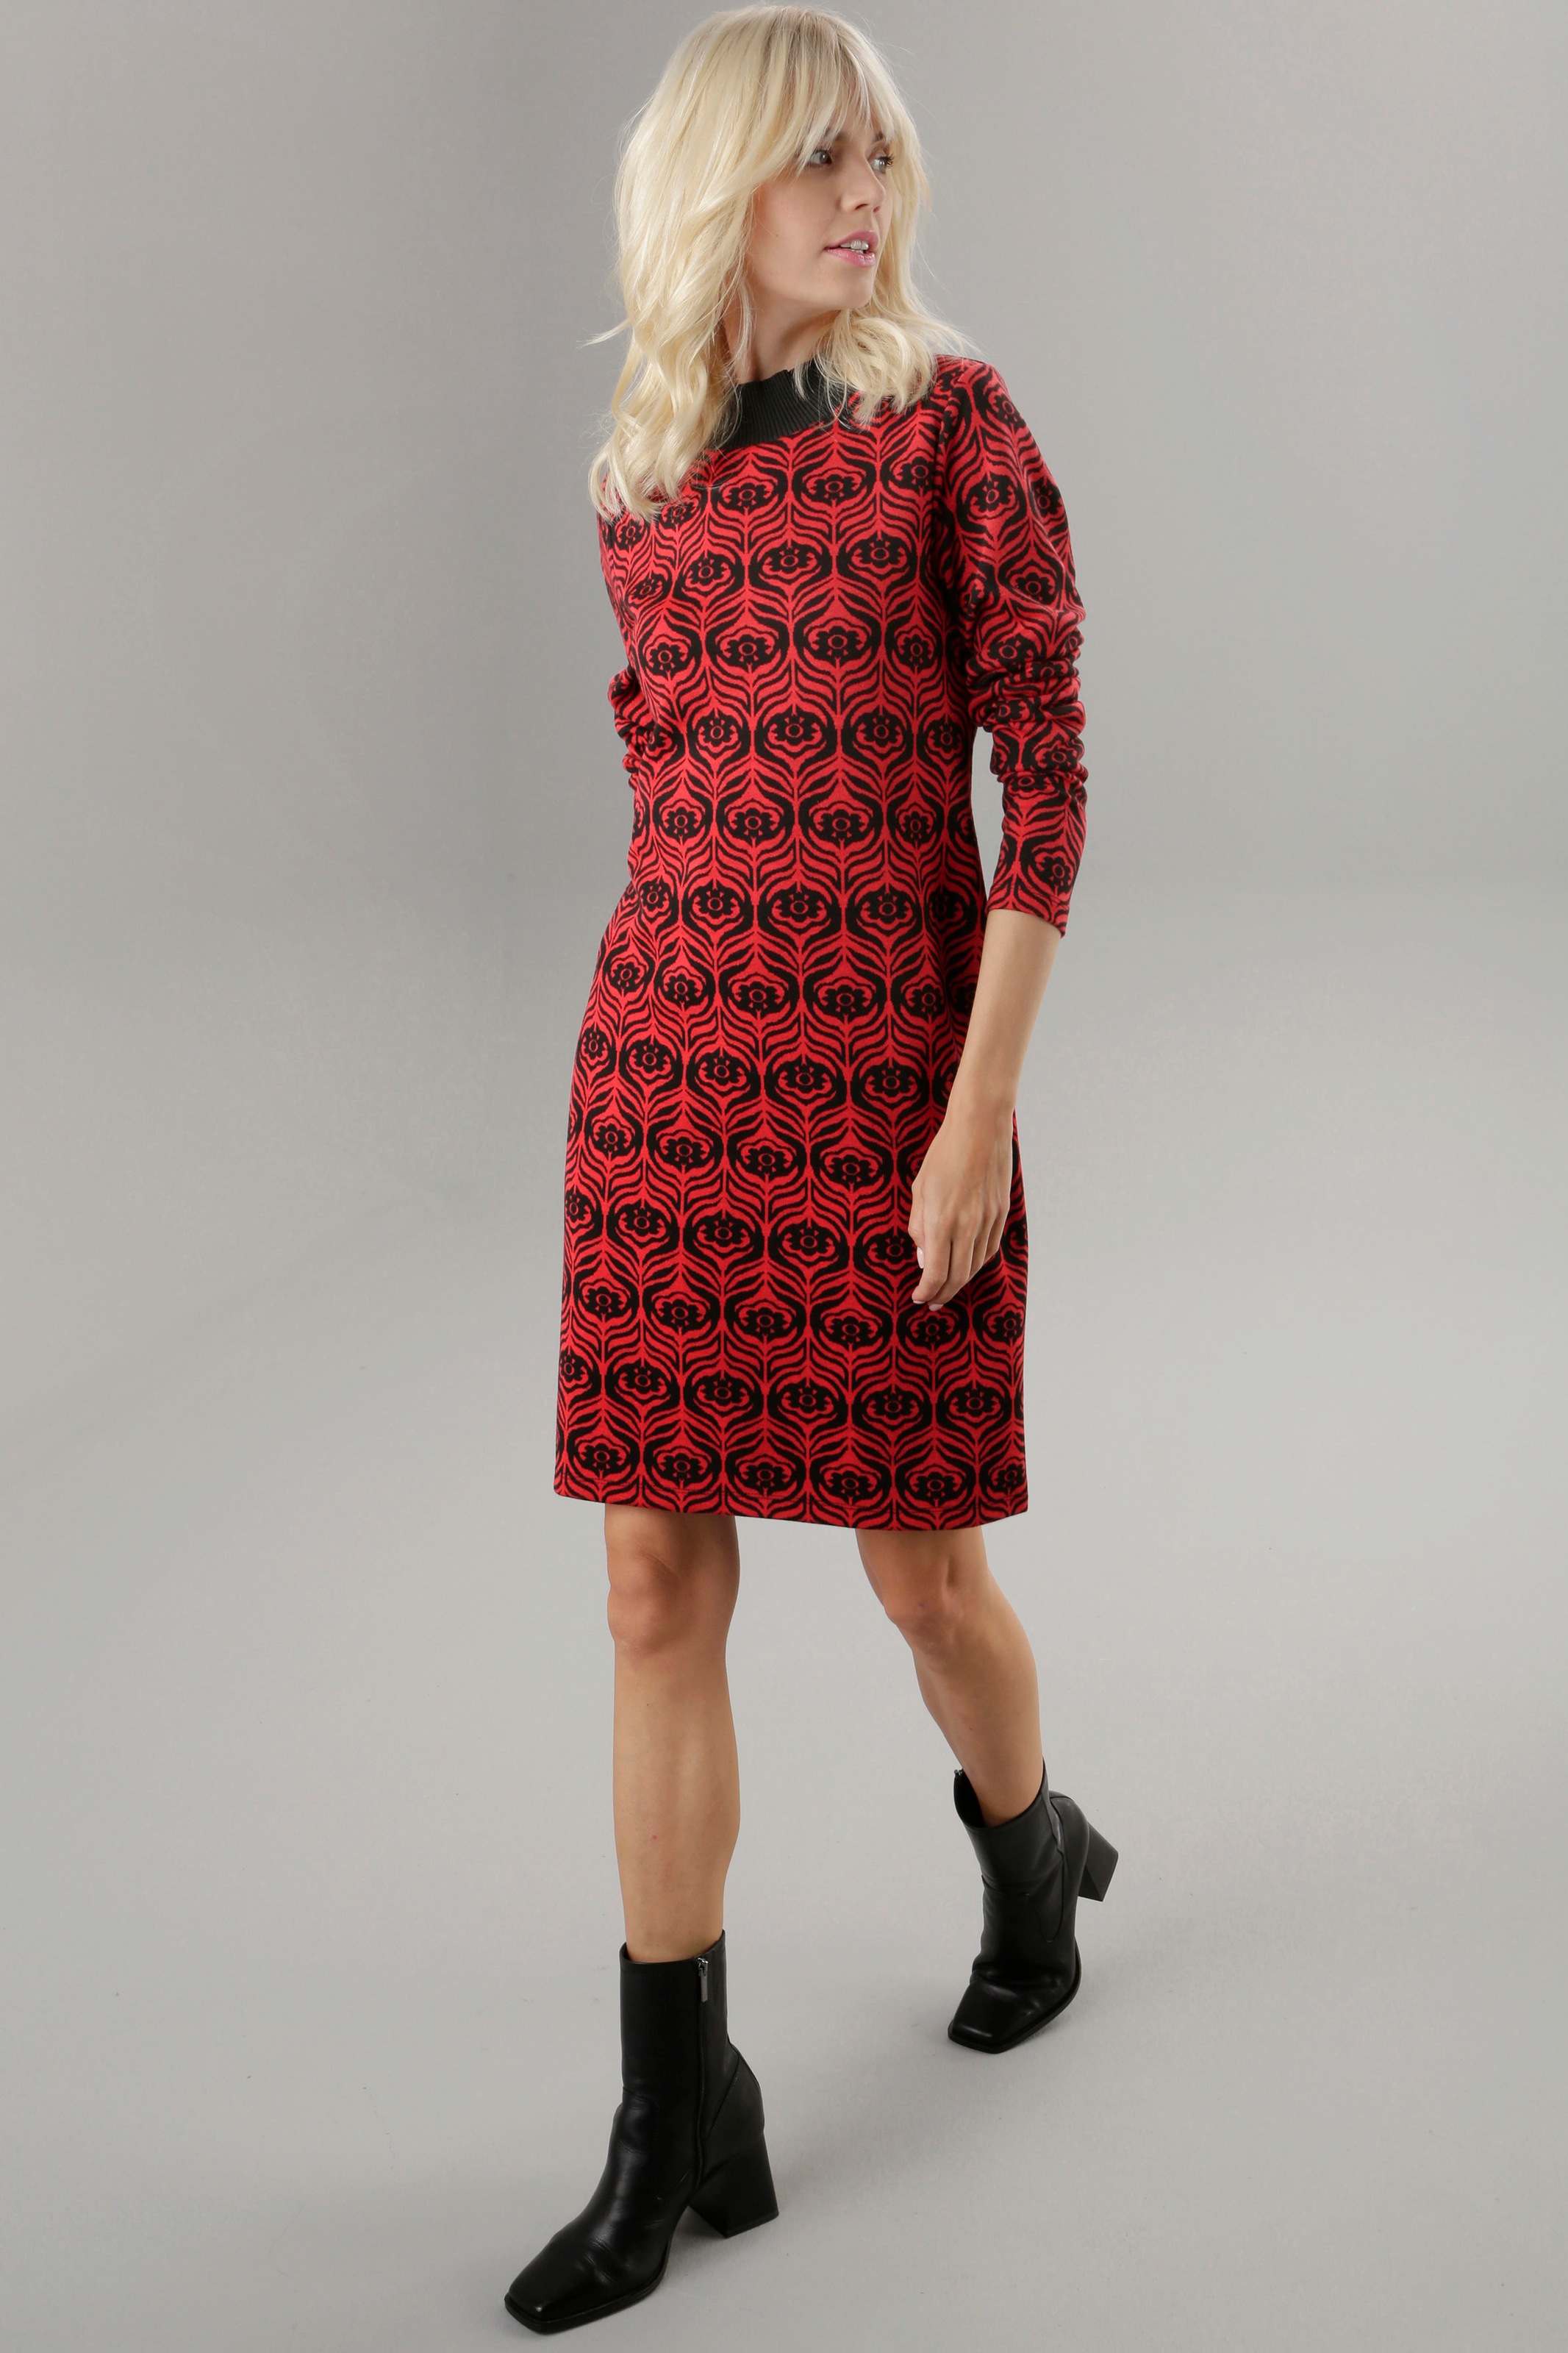 Jerseykleid, Retro-Muster Aniston mit bei ♕ SELECTED